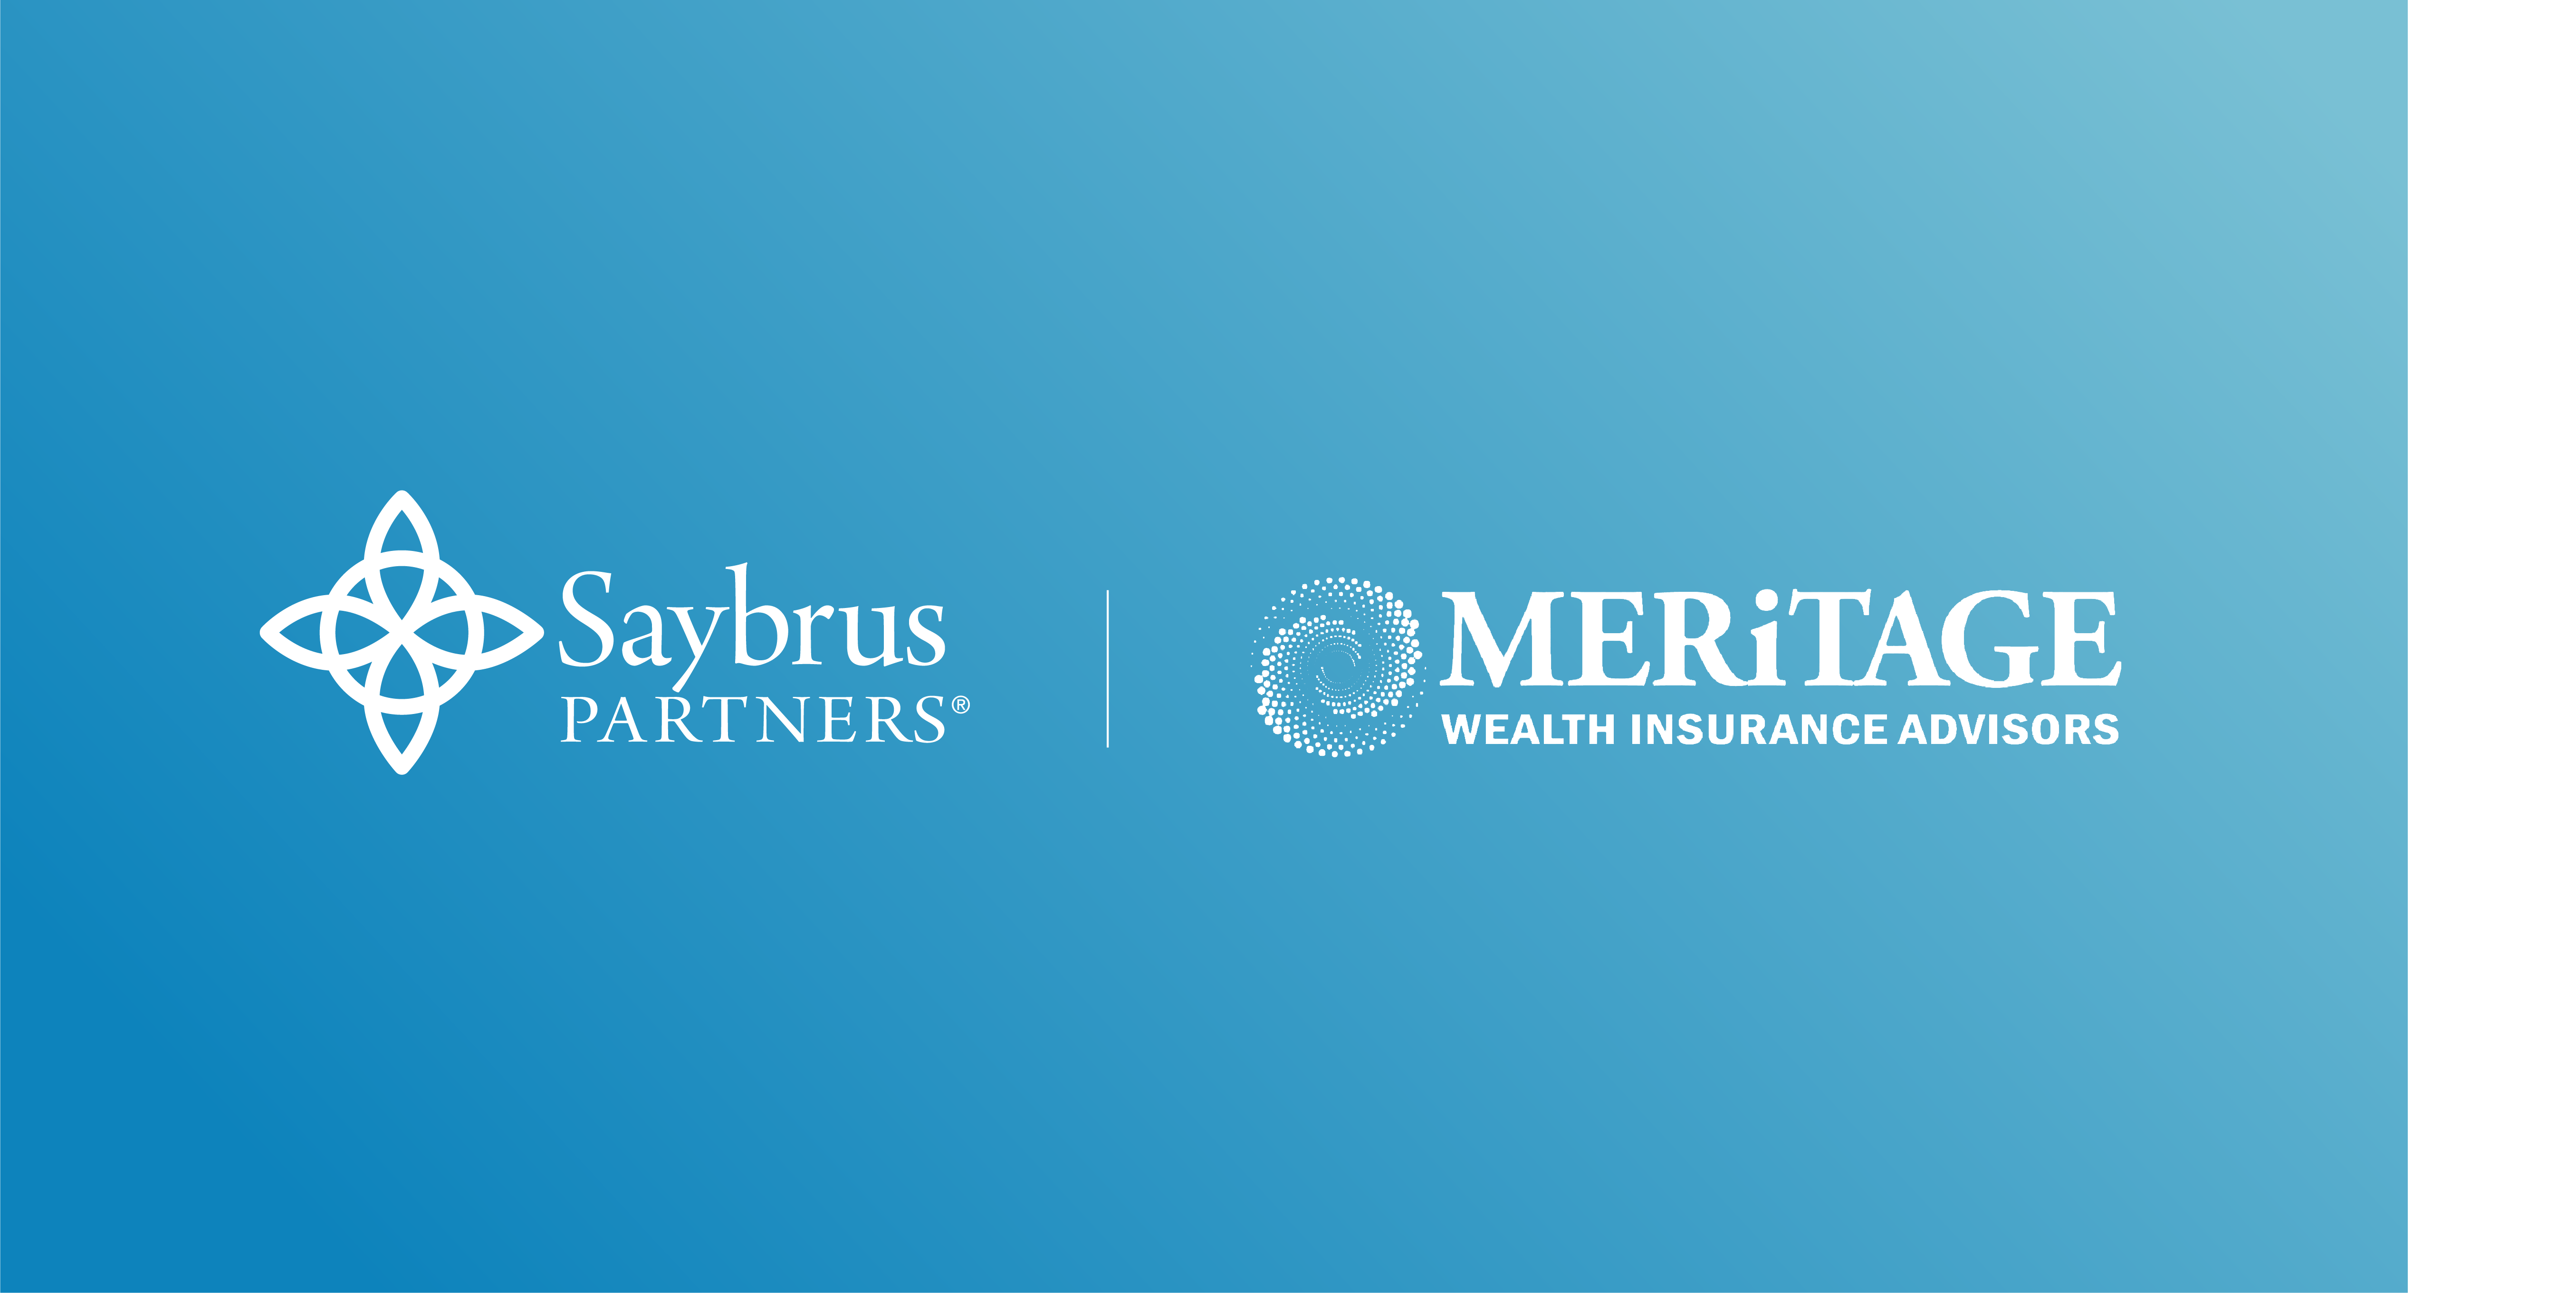 Meritage Wealth Insurance Advisors Joins Forces with AmeriLife’s Saybrus Partners